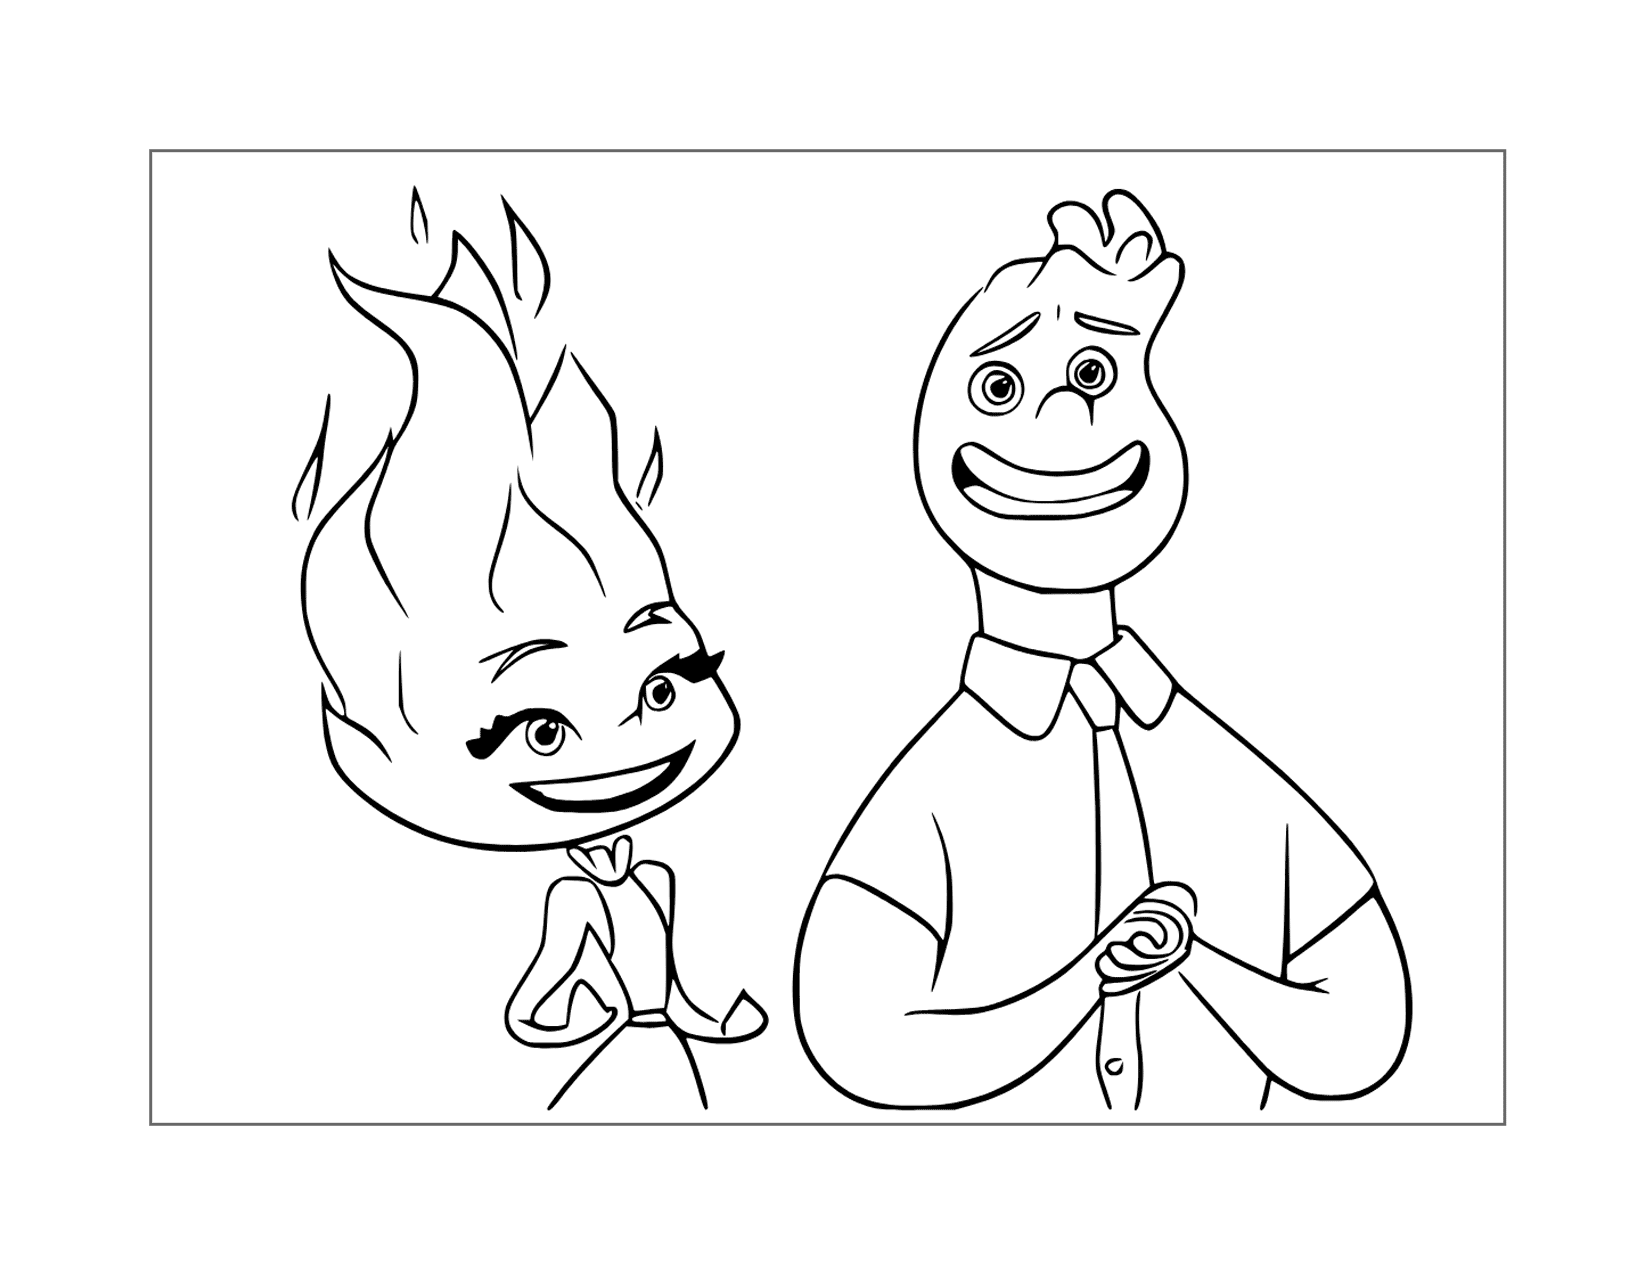 Elemental Coloring Page